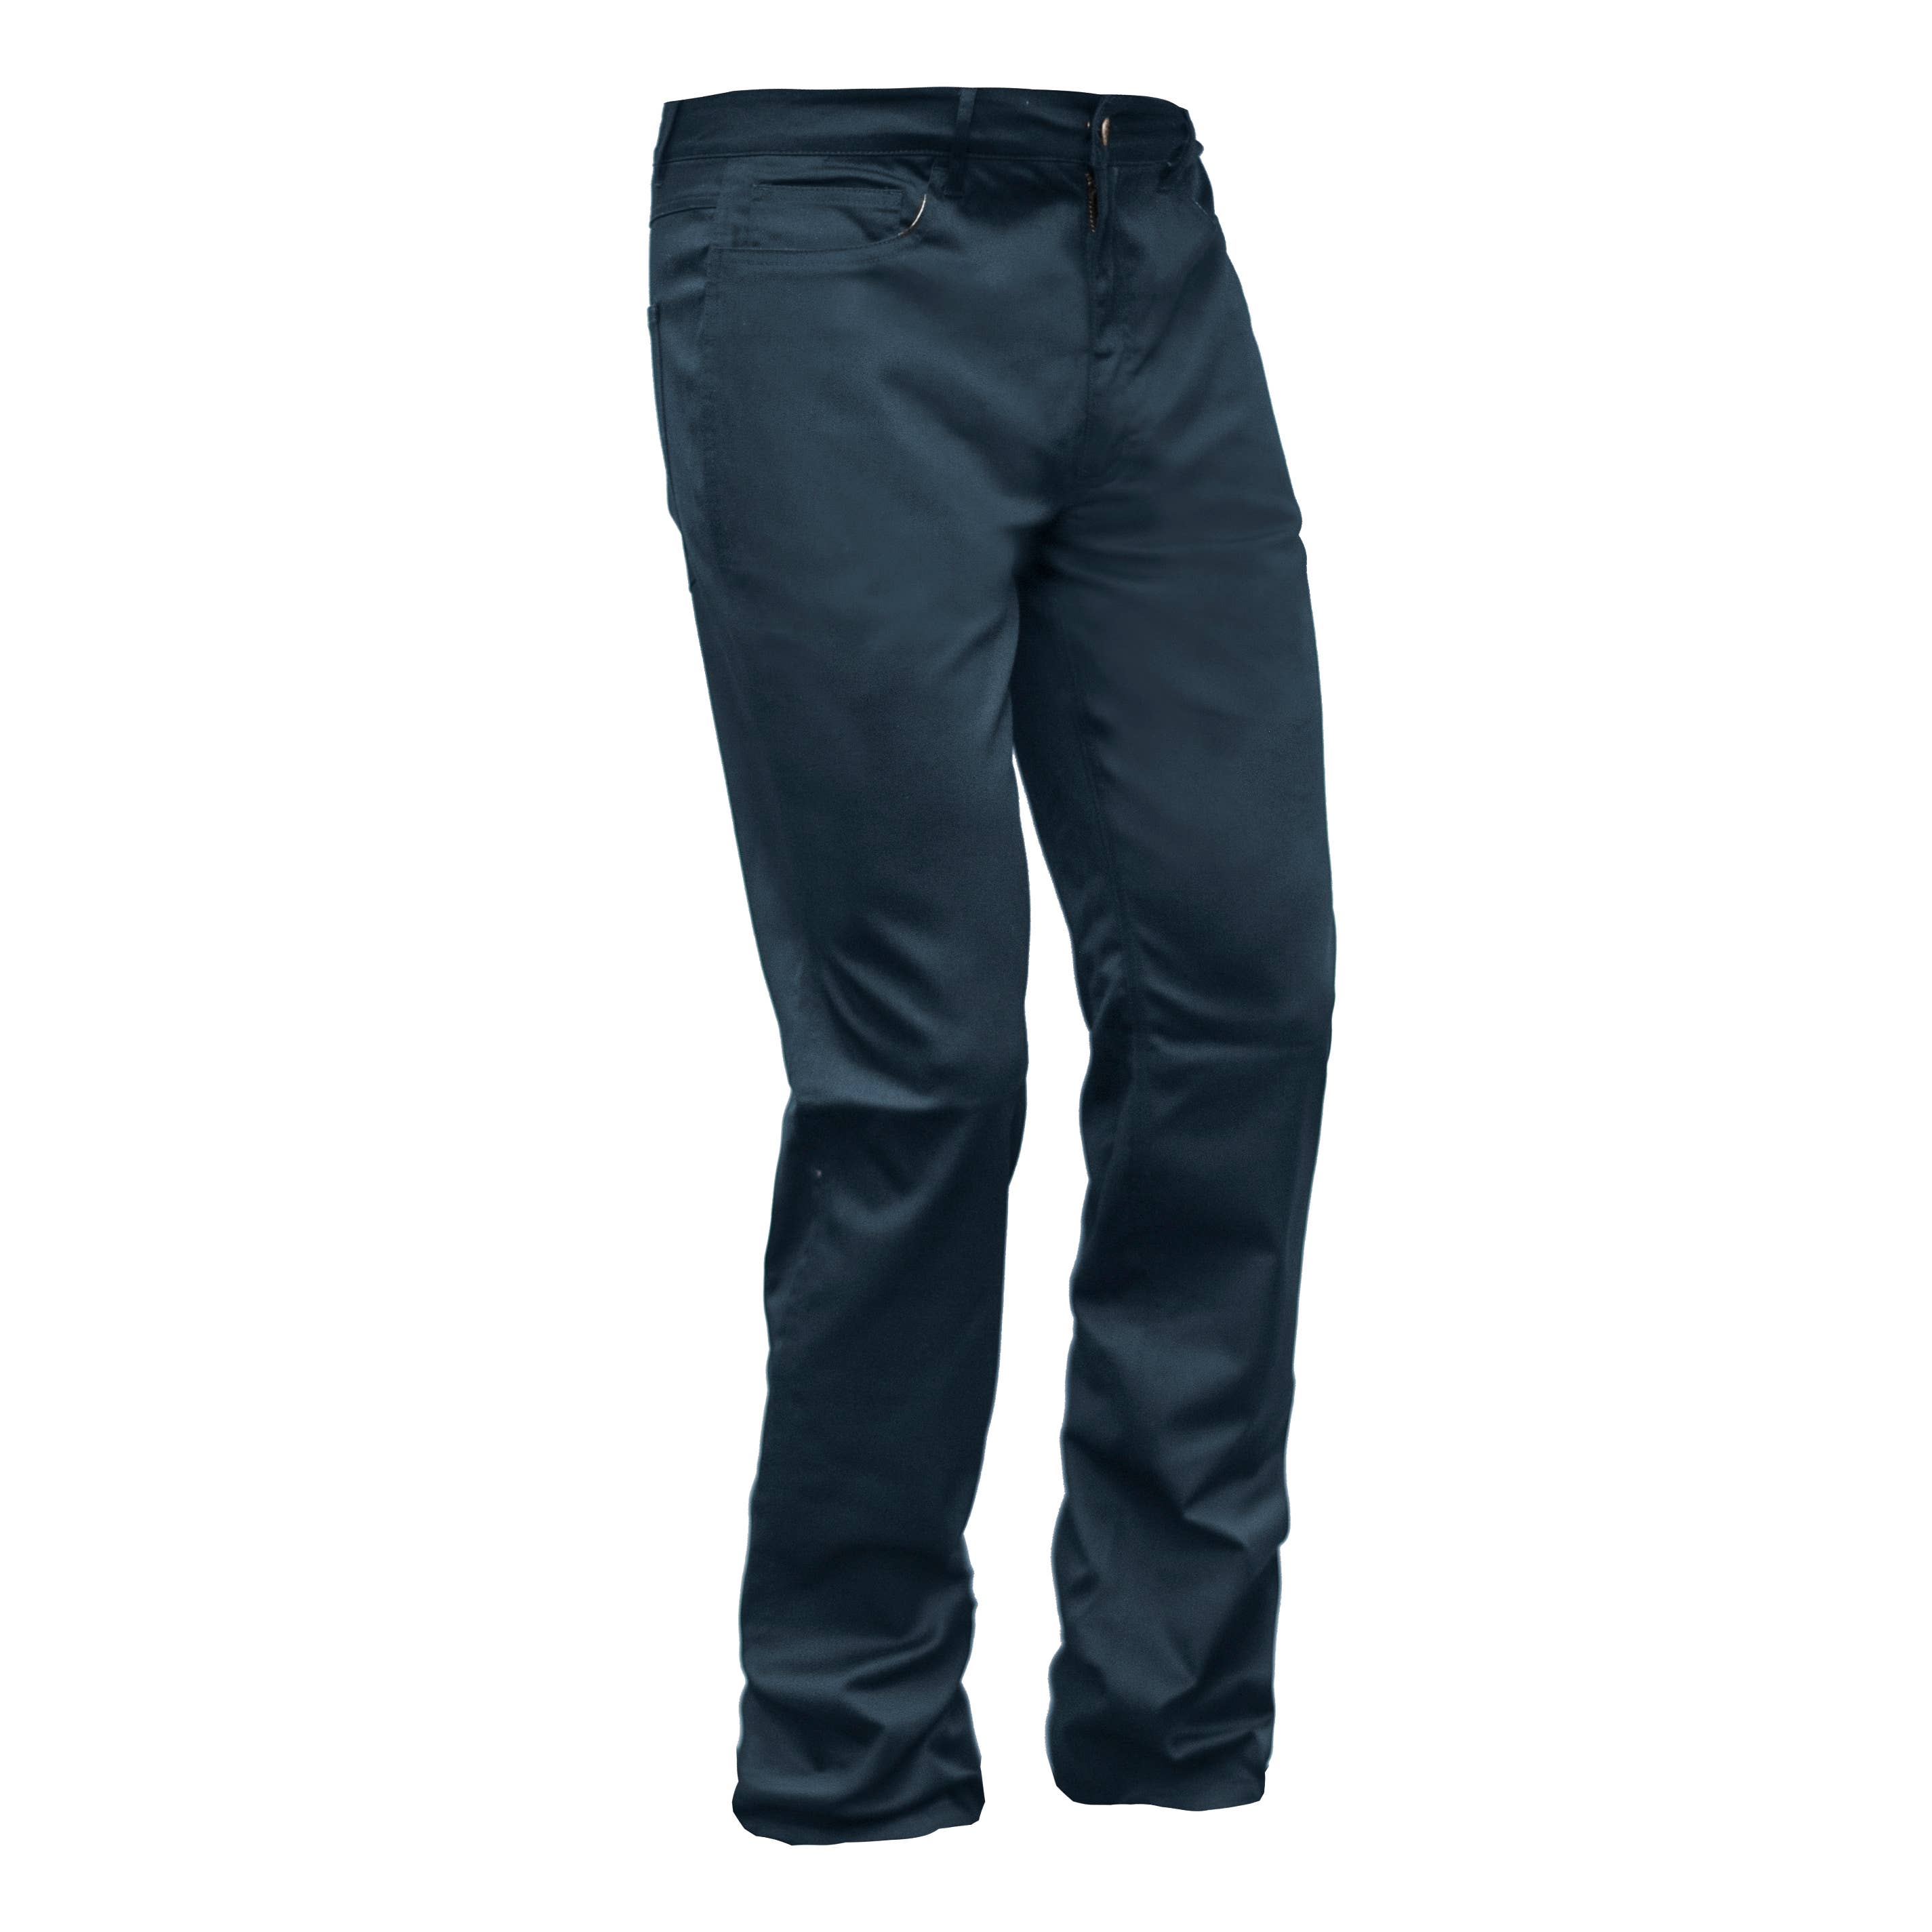 Orange River - OR® Randy Relax Fit Work Pants with Dupont® Teflon Finish